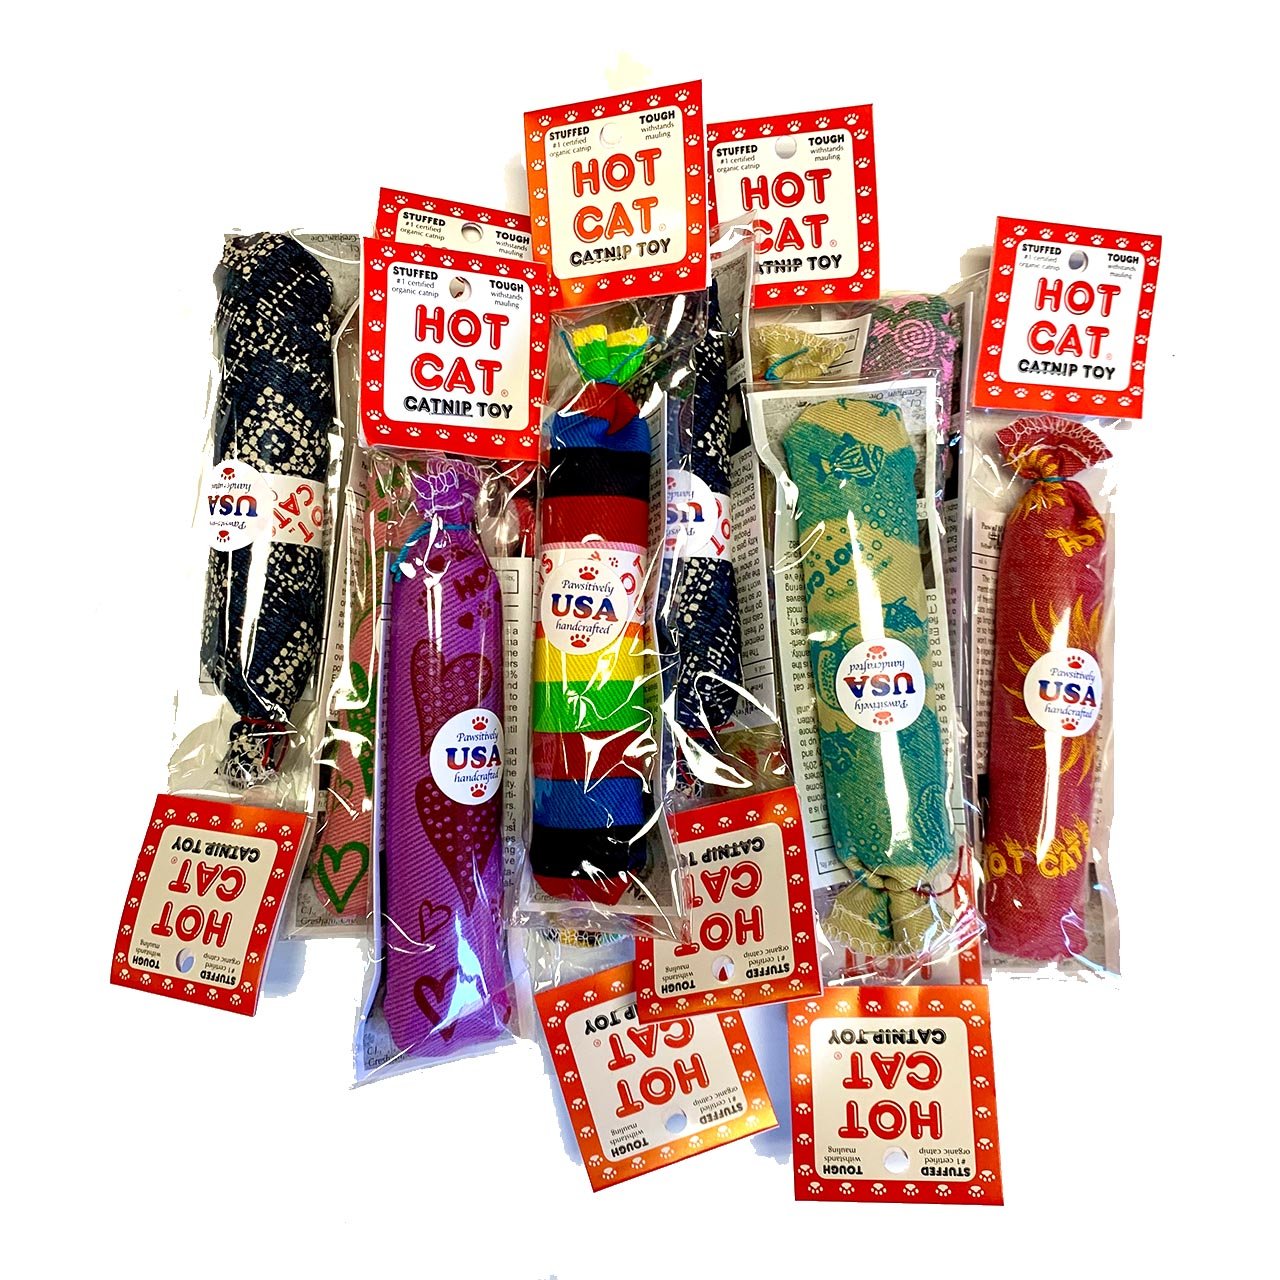 Colorful Sausage shaped toys filled with catnip, packaged in clear cellophane with cardboard tag.